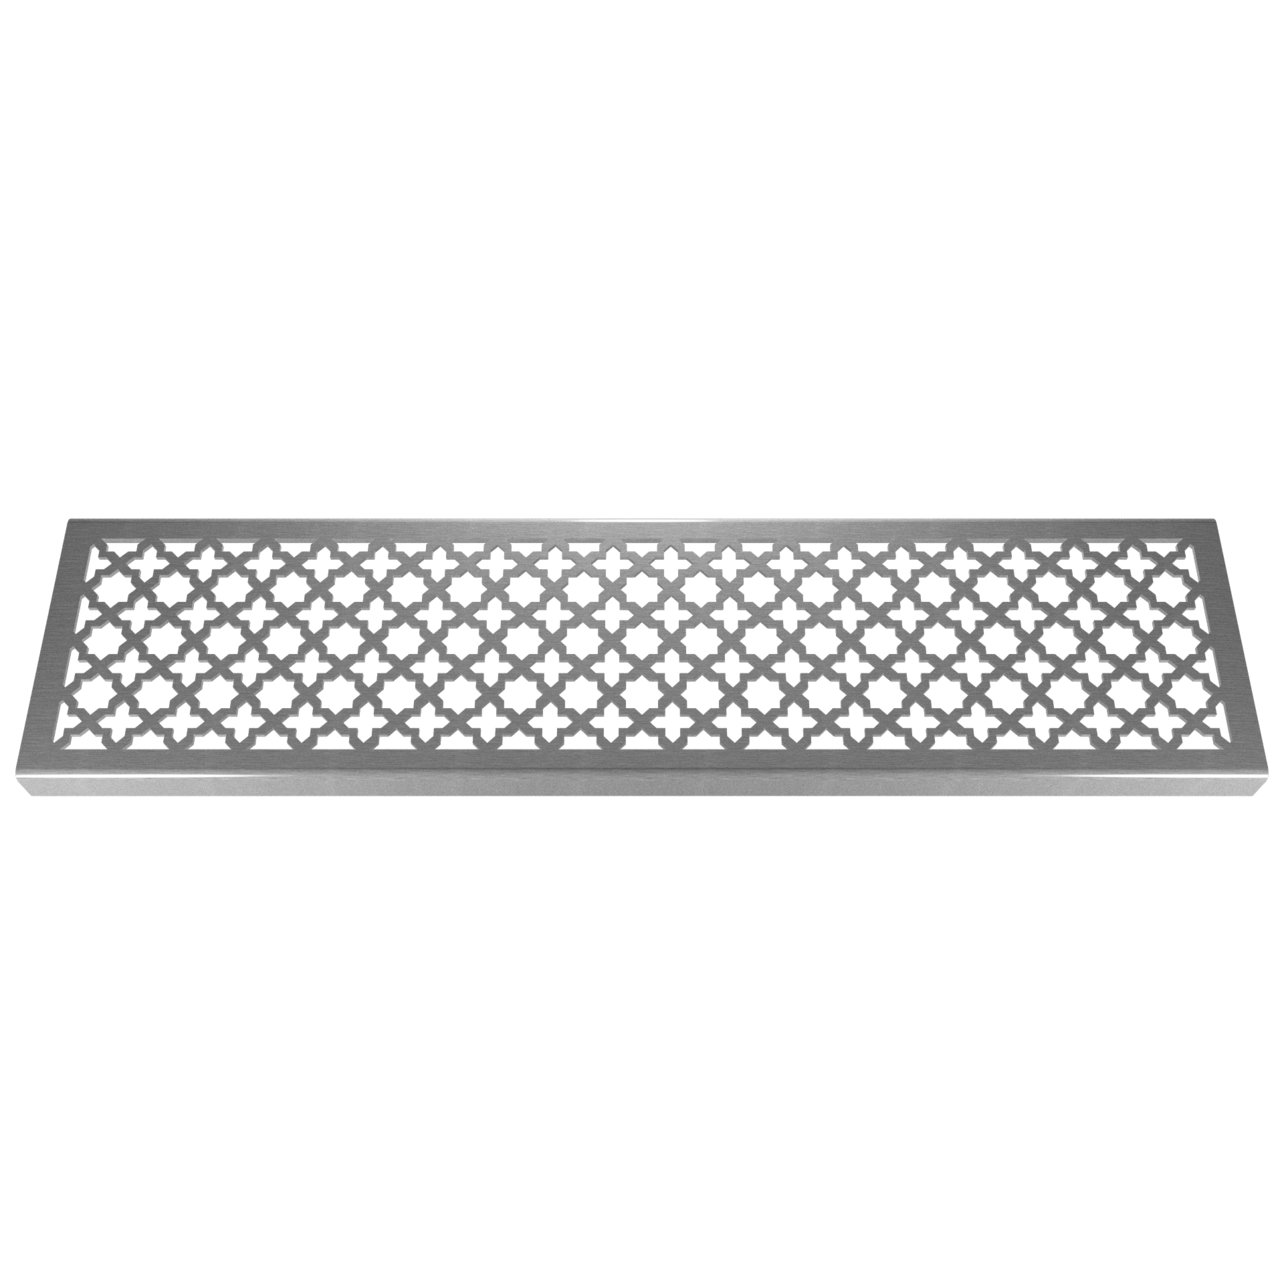 Columbus 304 Stainless Steel Channel Drain Grate 125 x 1000mm (5 Inch)